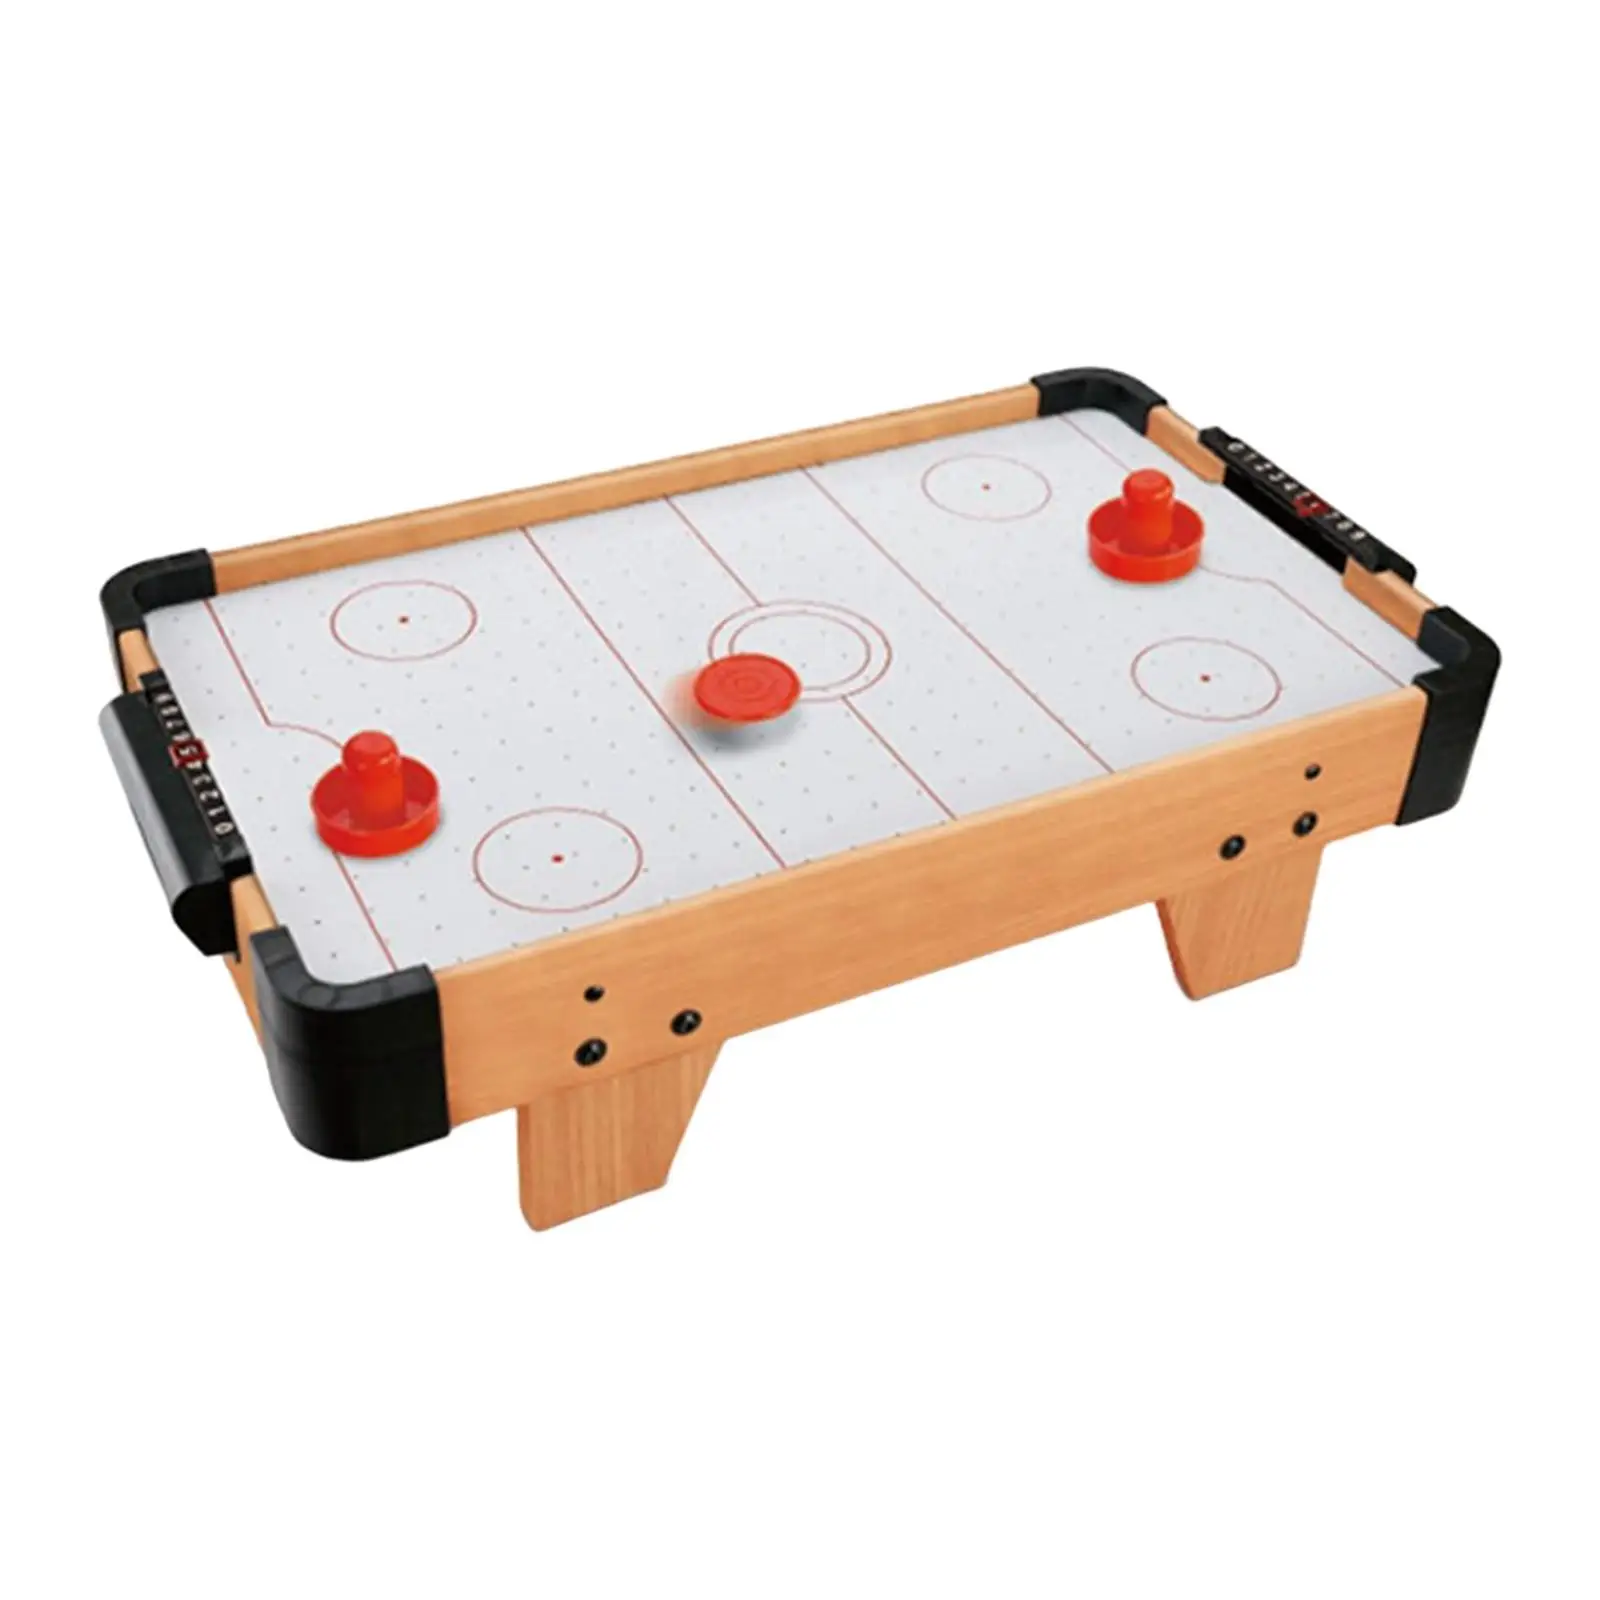 Mini Air Hockey Table,Paced Winner Board Game,Desktop Playing Party for Girls Boys